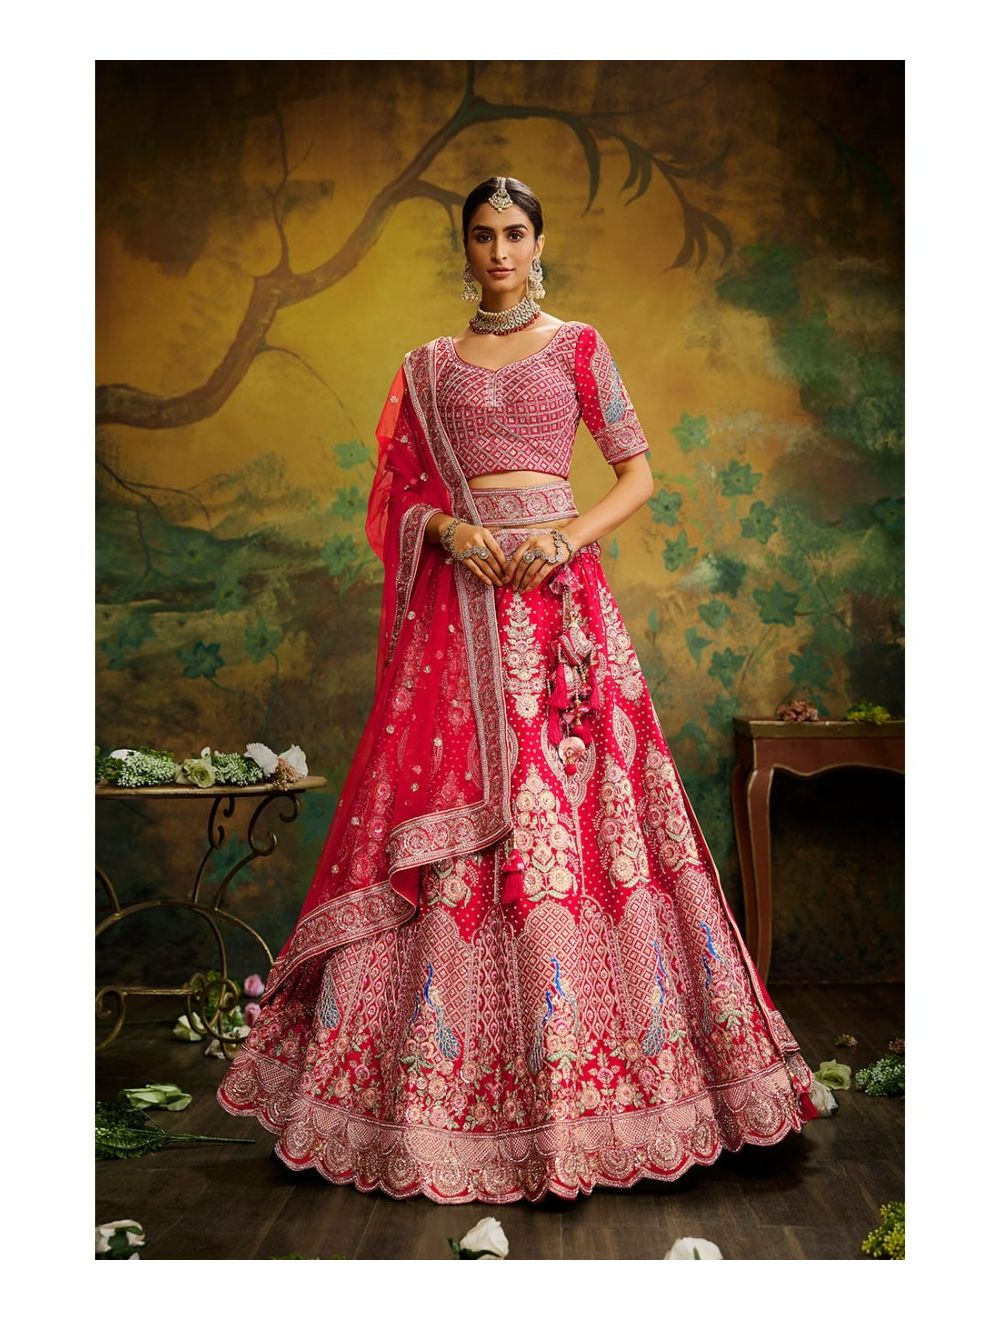 Finding The Ideal Bridal Lehenga: Tips And Trends For Brides-To-Be - Wish N  Wed